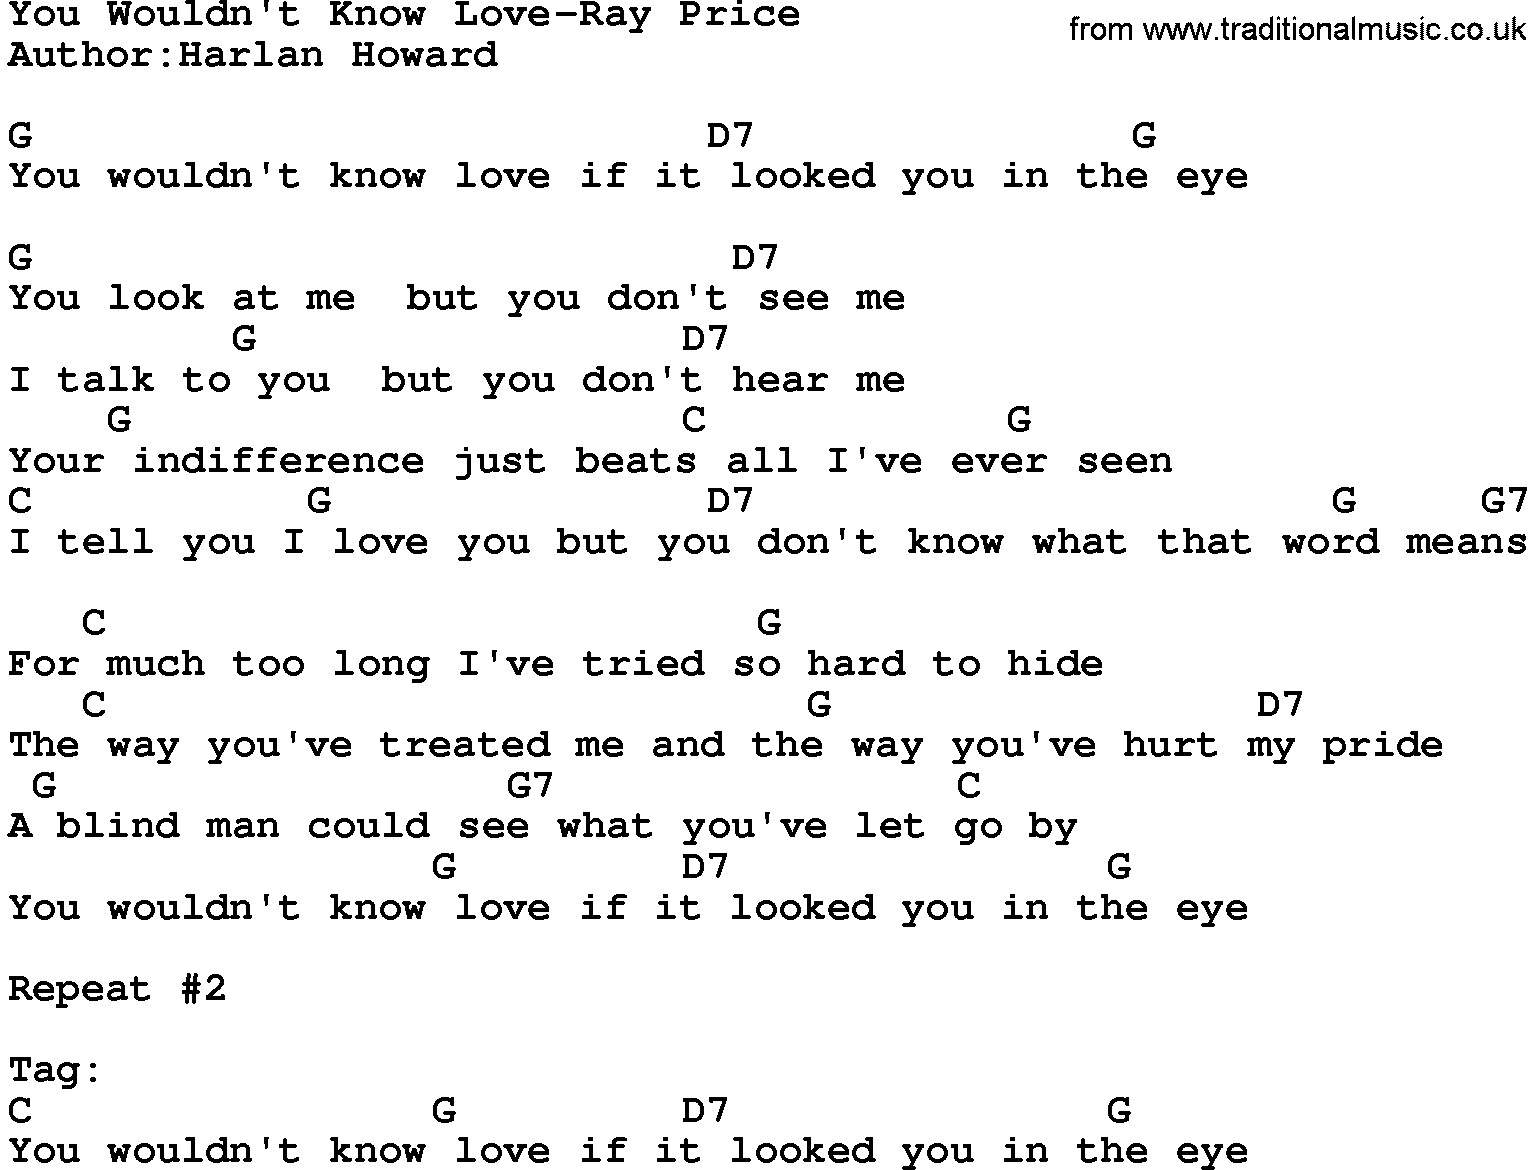 Country music song: You Wouldn't Know Love-Ray Price lyrics and chords